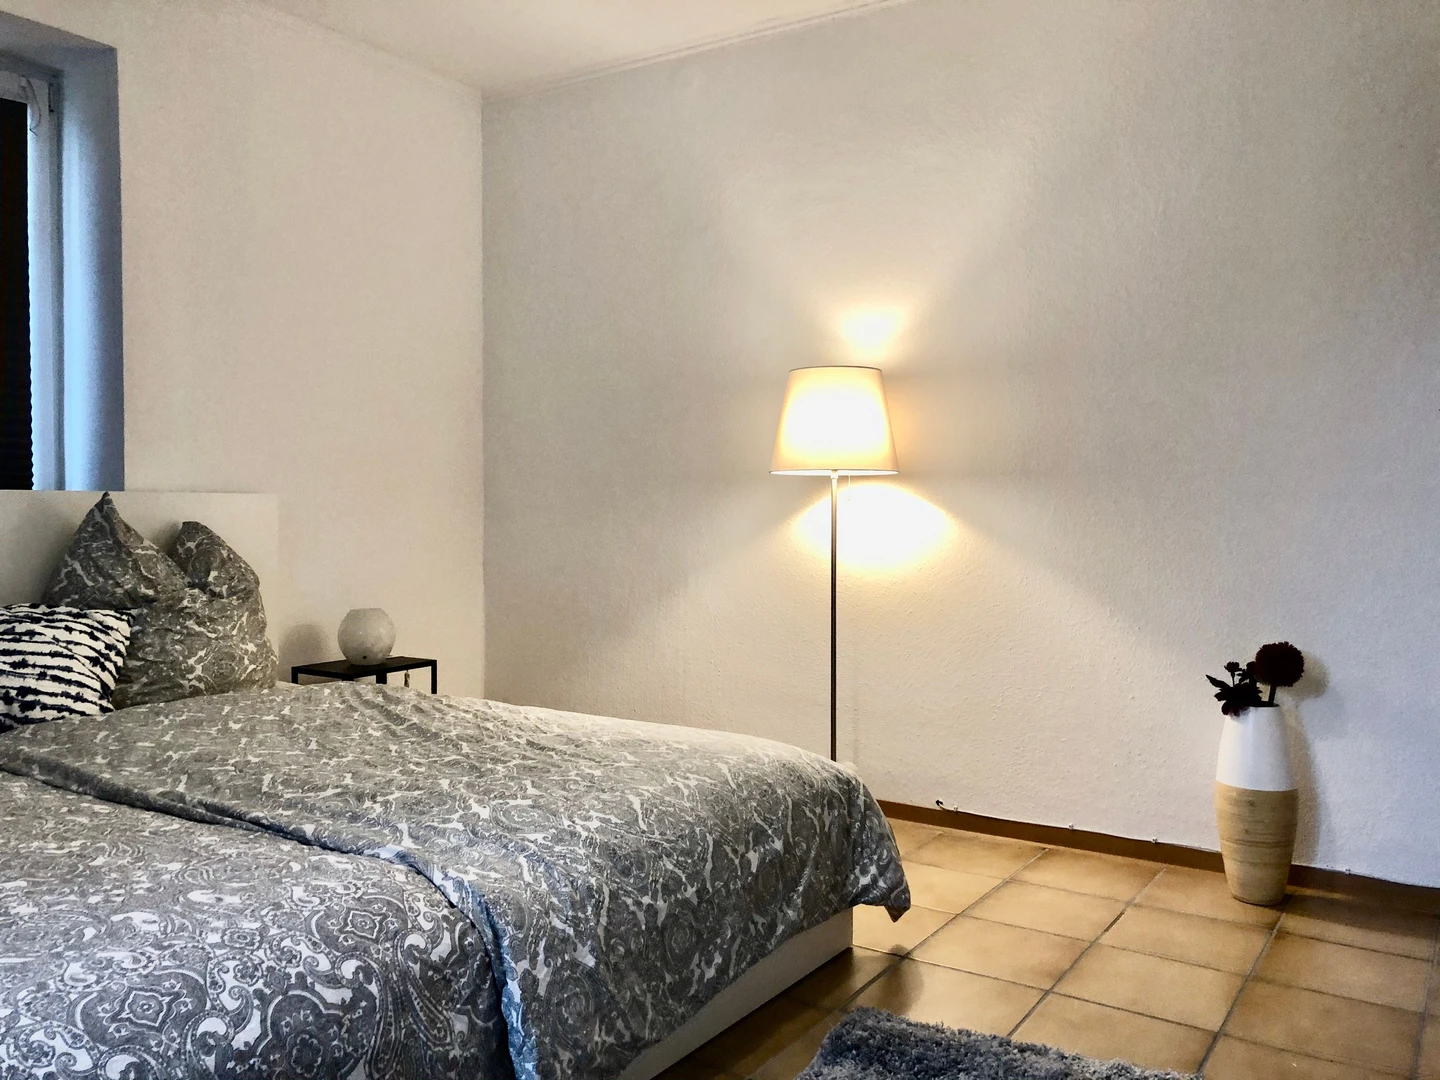 Room for rent in a shared flat in kaiserslautern